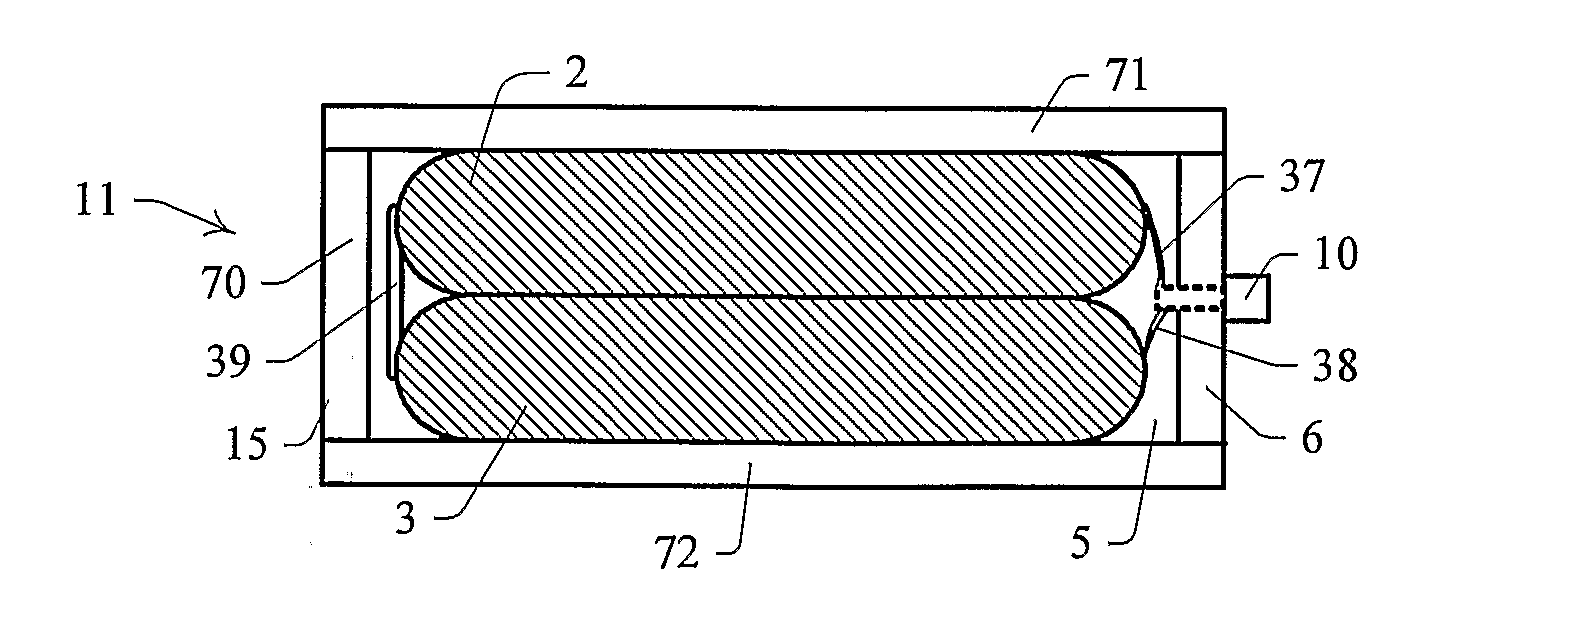 Package for an Electrical Device